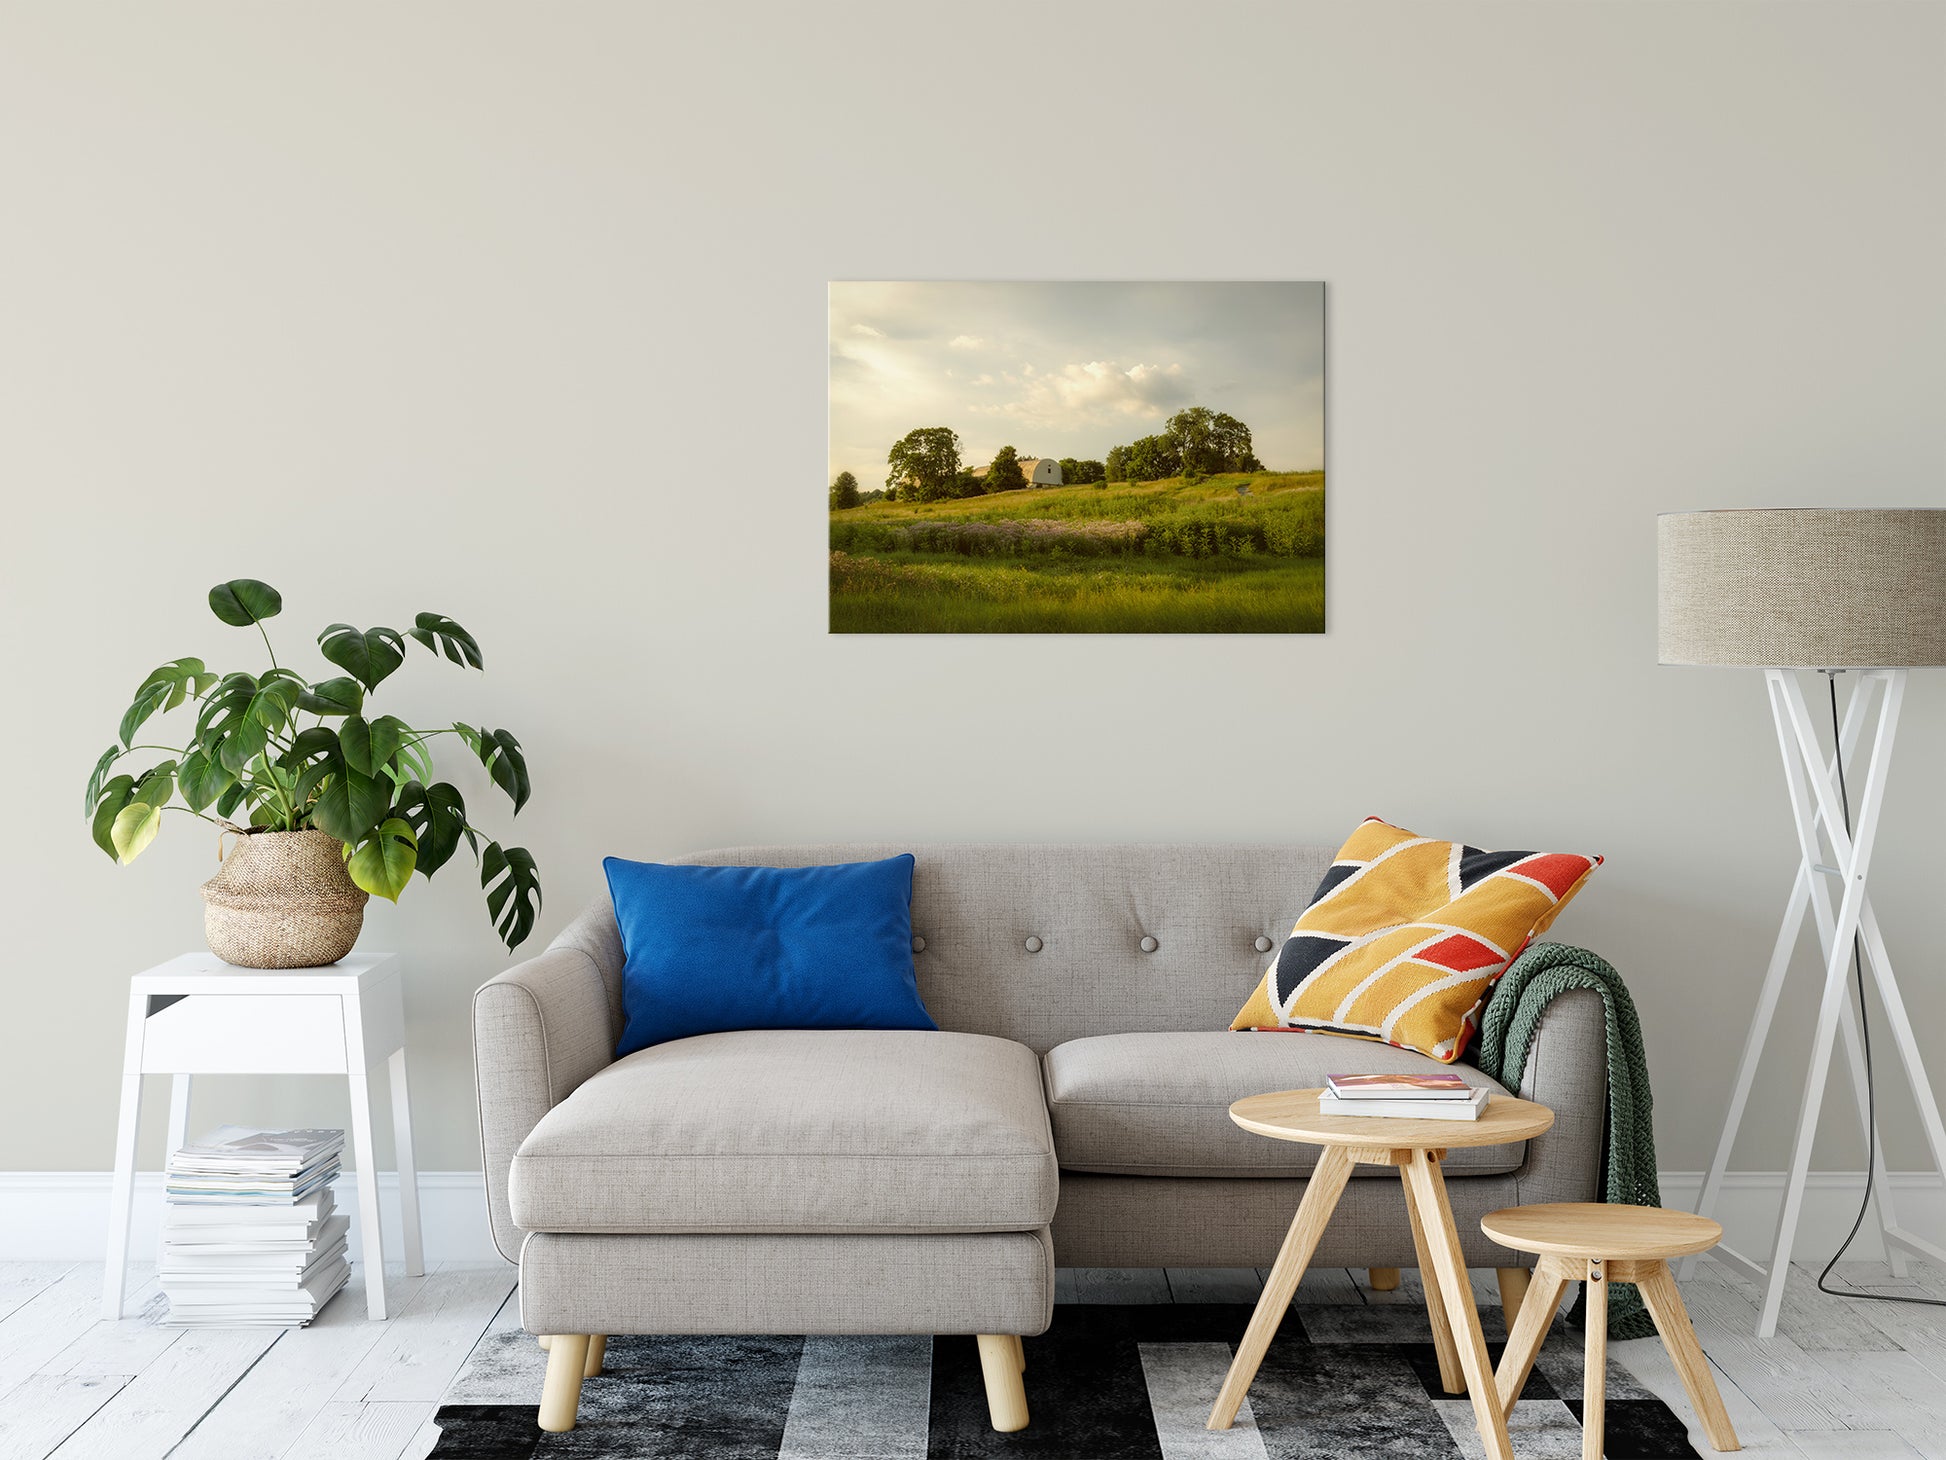 Remnant of Better Days Landscape Photo Fine Art Canvas Wall Art Prints 24" x 36" - PIPAFINEART